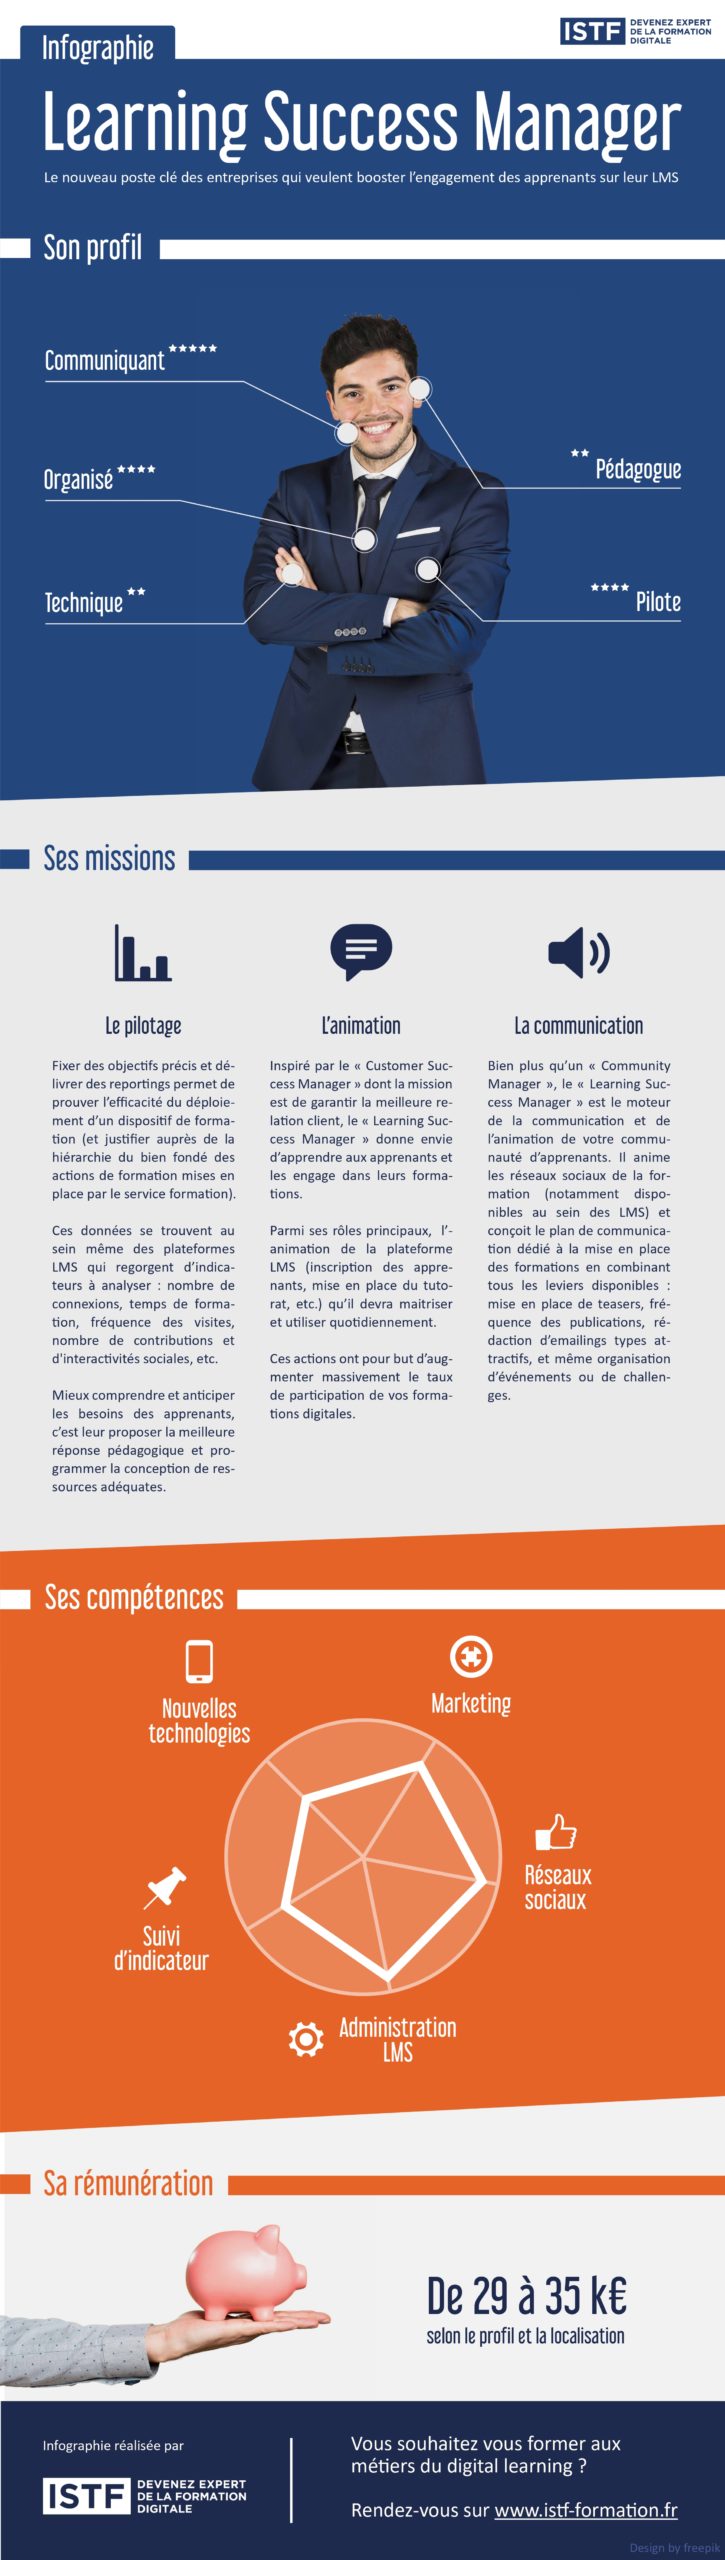 infographie learning success manager